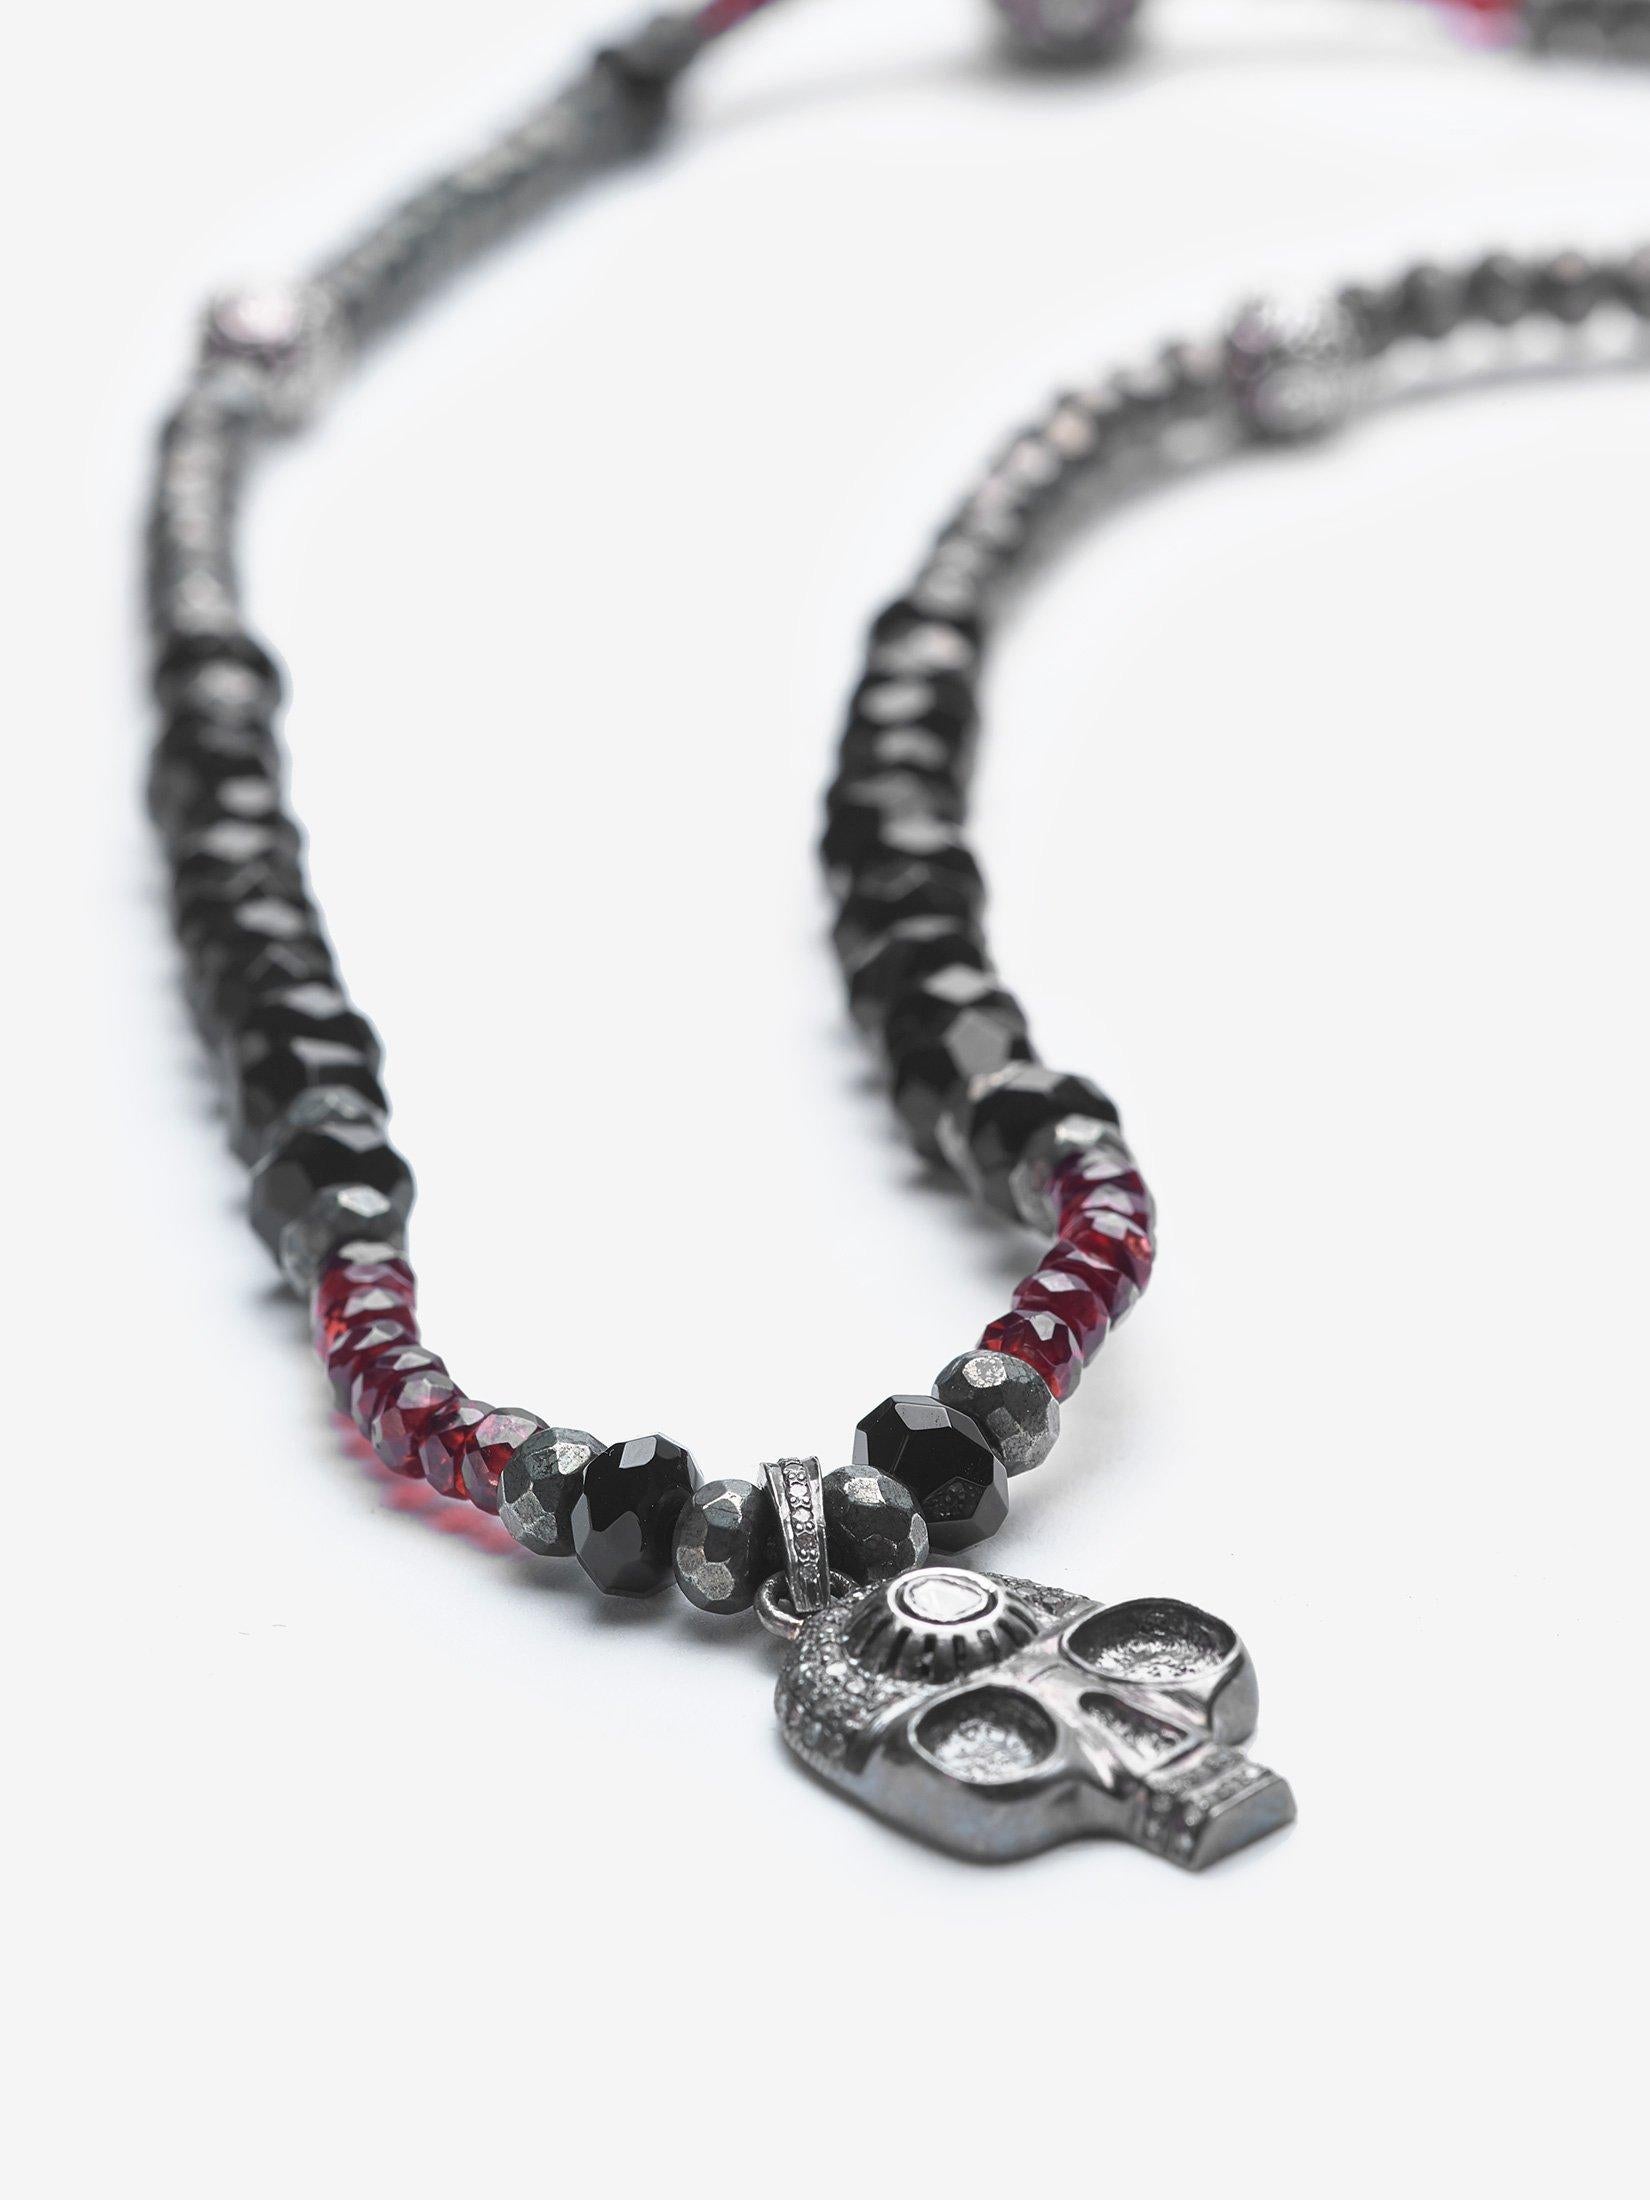 Story Behind the Jewelry
A favorite necklace among musicians.  Pure Fire is accented by a stunning skull that is adorned with rich garnet and pyrite.  Skulls have many interpretations.  The necklace was designed with the symbolic purpose as a